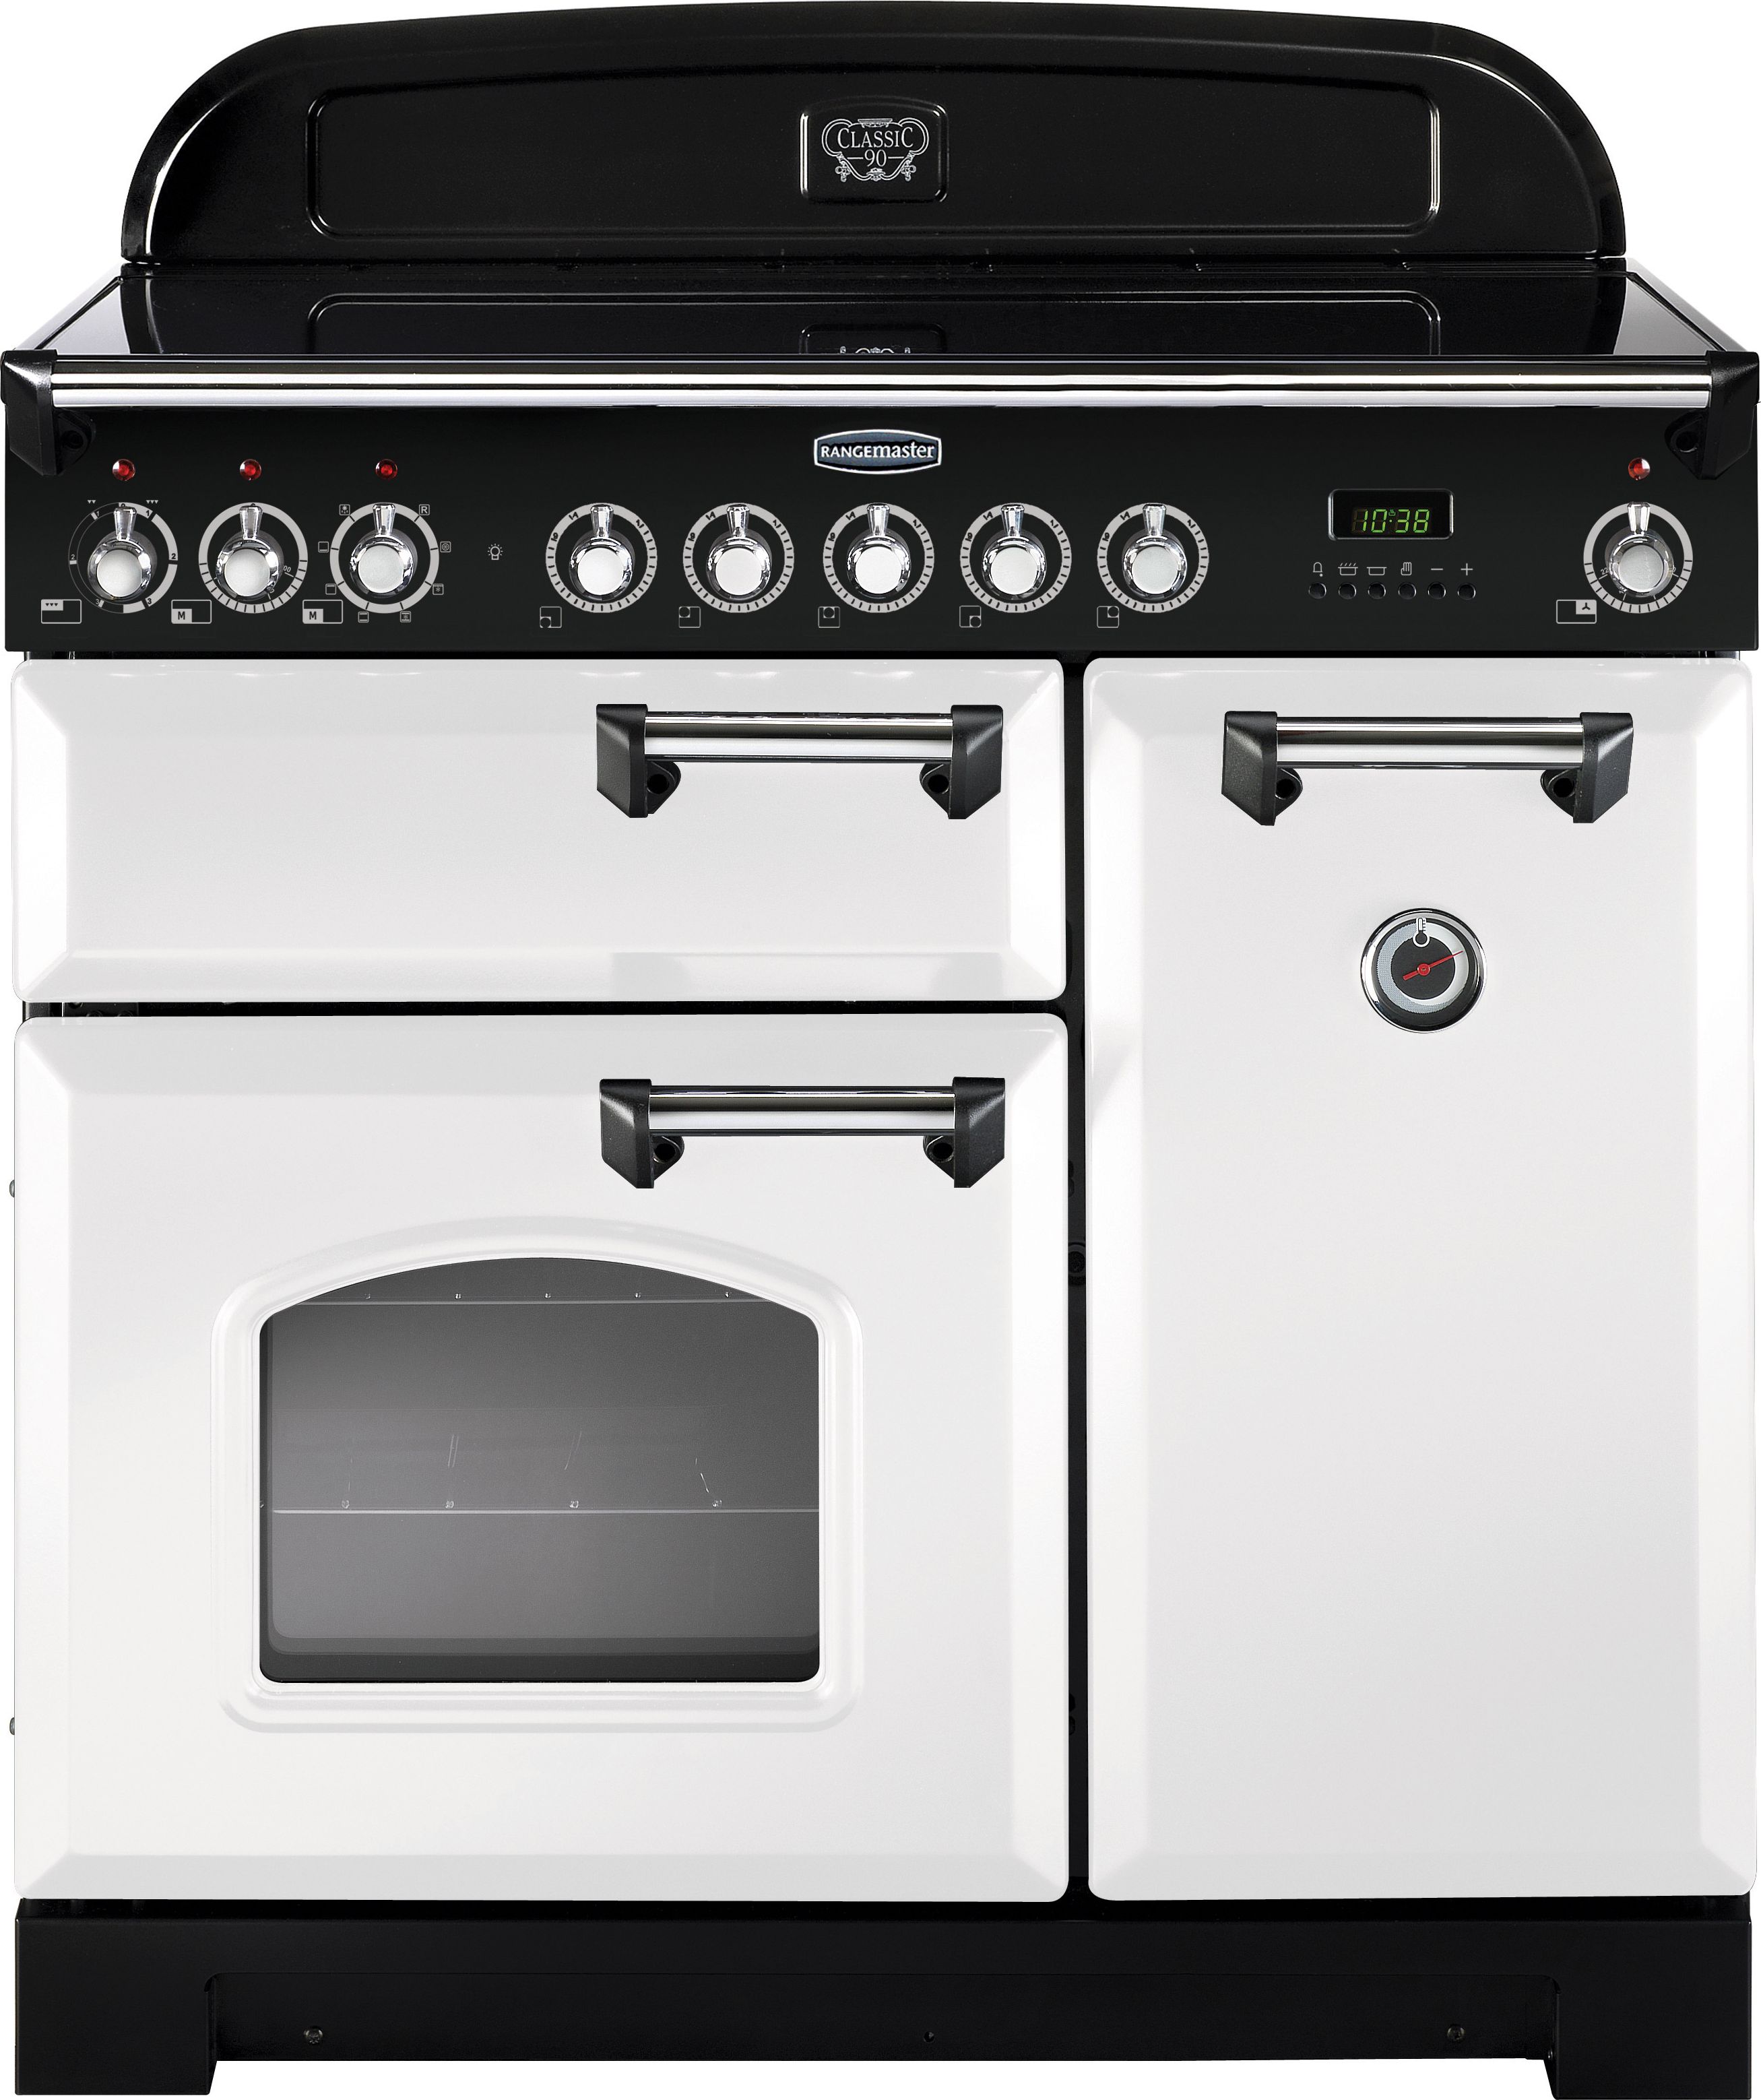 Rangemaster Classic Deluxe CDL90EIWH/C 90cm Electric Range Cooker with Induction Hob - White / Chrome - A/A Rated, White